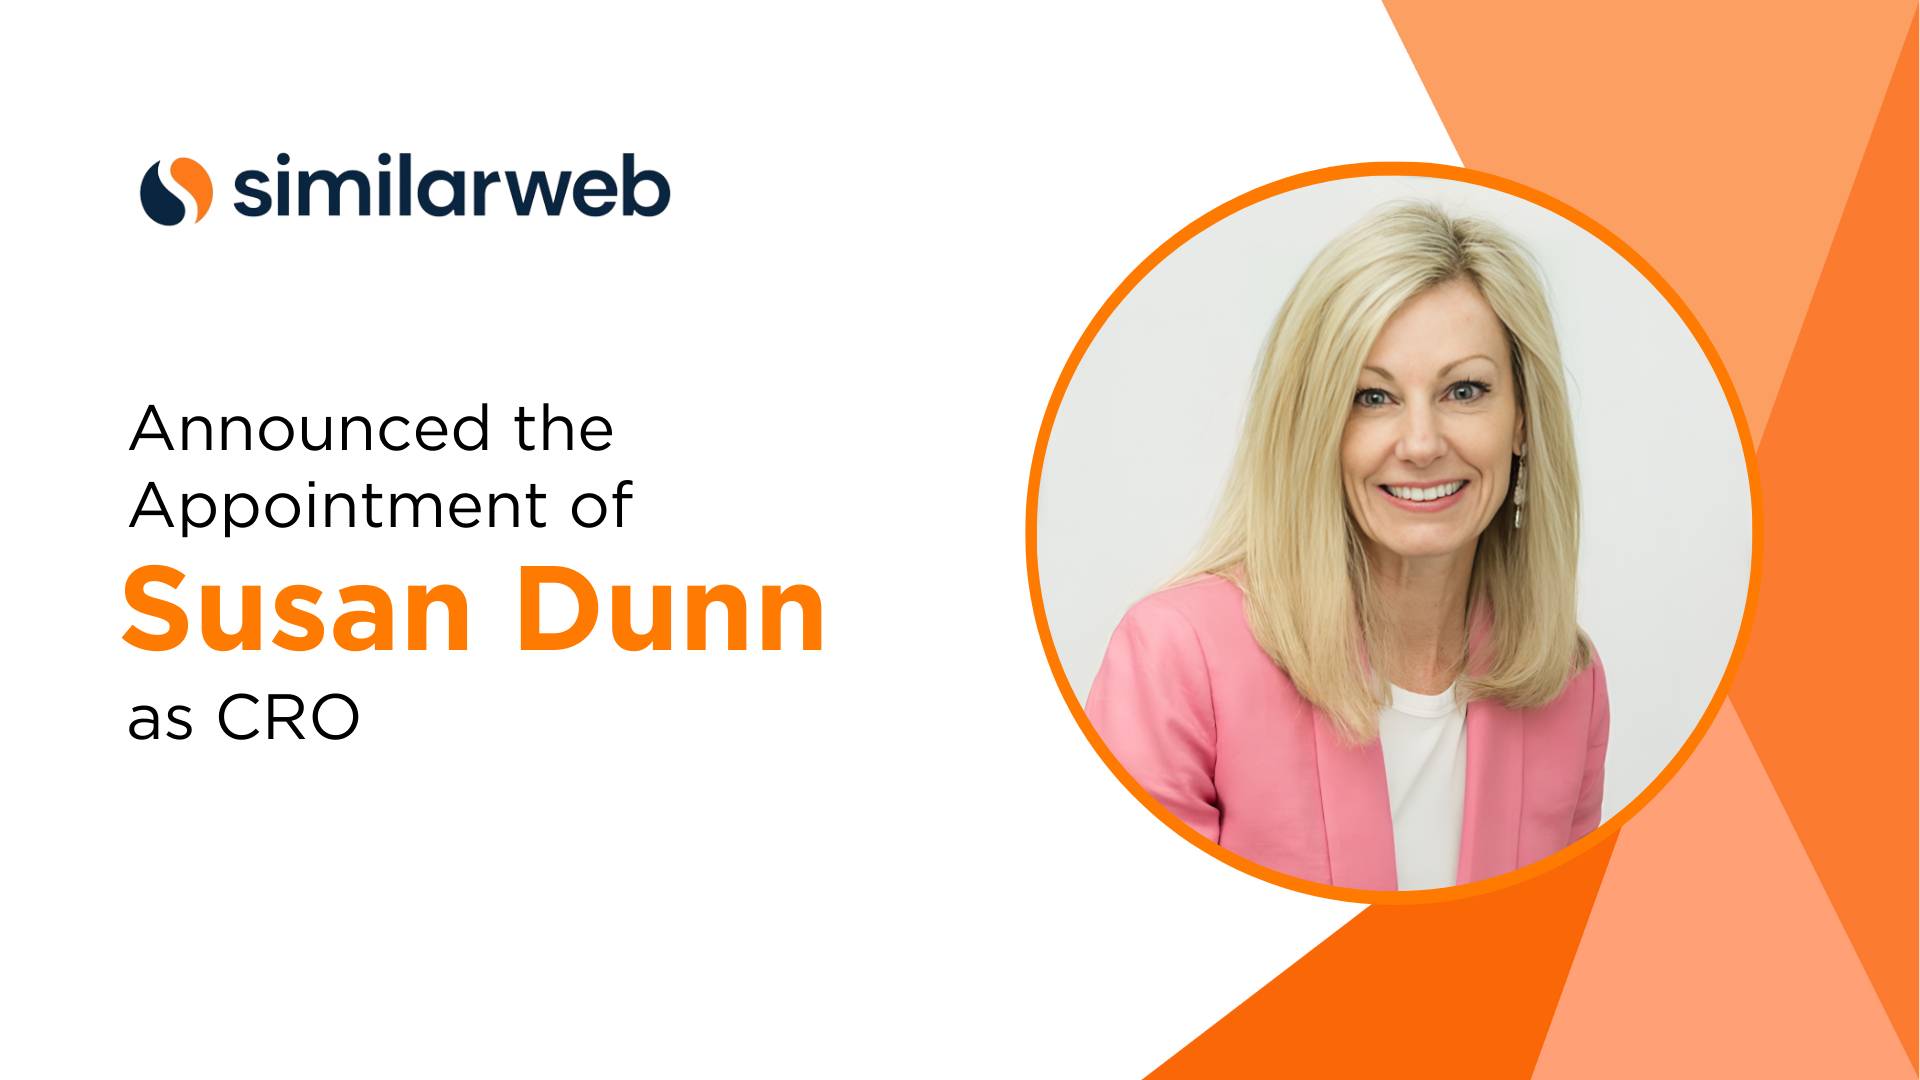 Similarweb Appoints Susan Dunn as Chief Revenue Officer